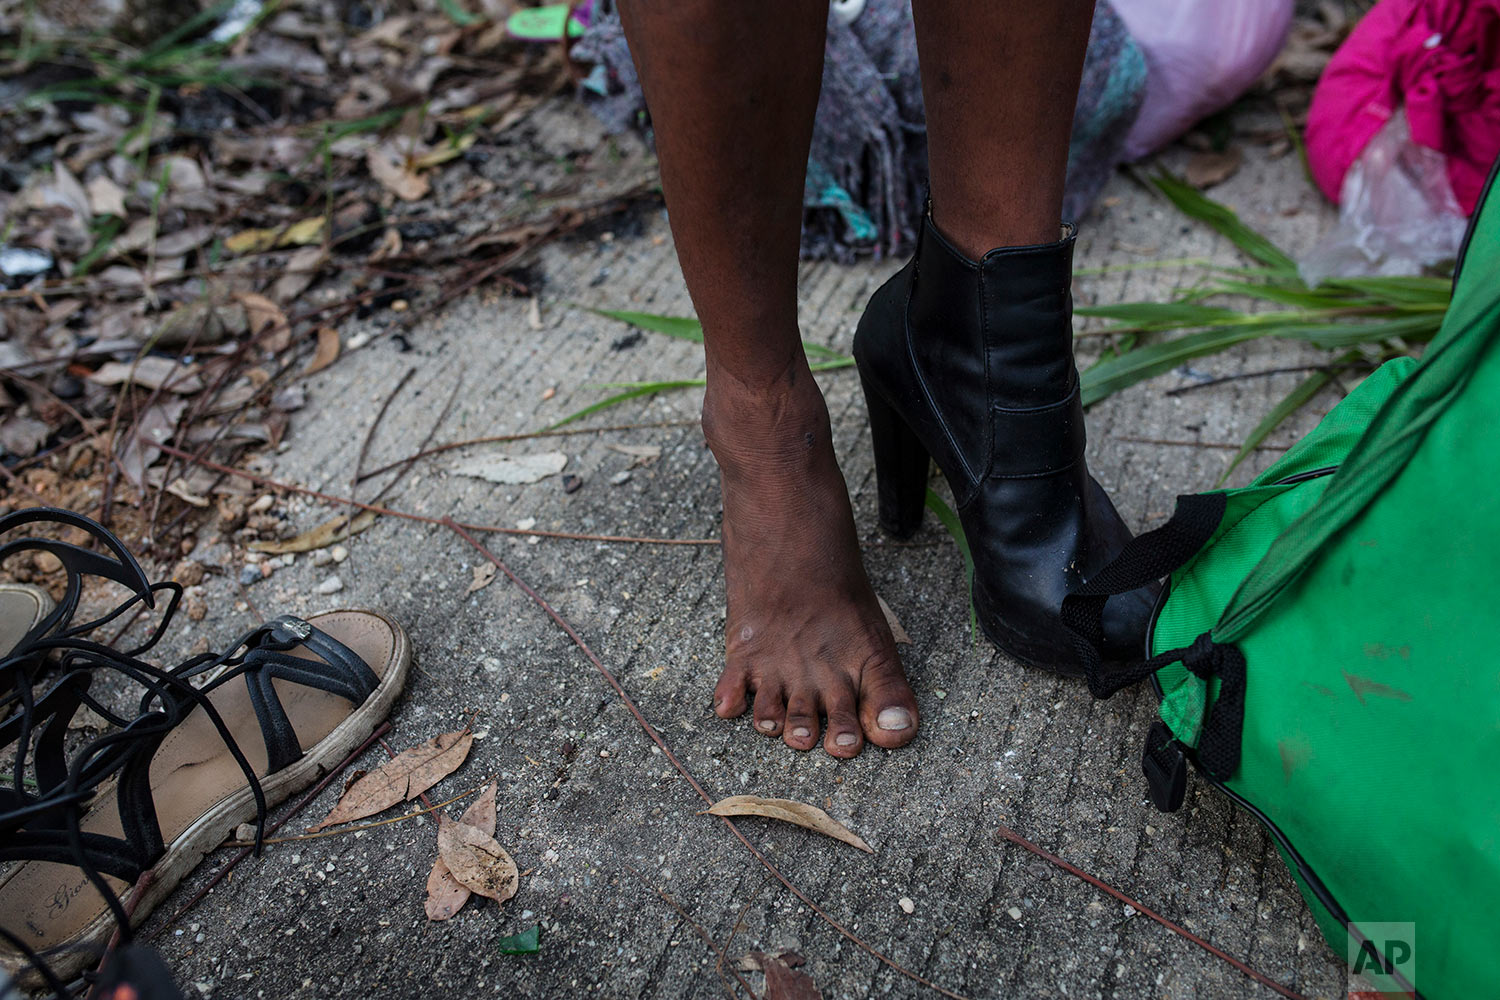  In this Nov. 3, 2018 photo, Honduran transgender Alexa Amaya, who is part of a group of 50 or so LGBTQ migrants traveling with the migrant caravan hoping to reach the U.S. border, tries on donated footwear at a shelter in Sayula, Mexico. (AP Photo/R